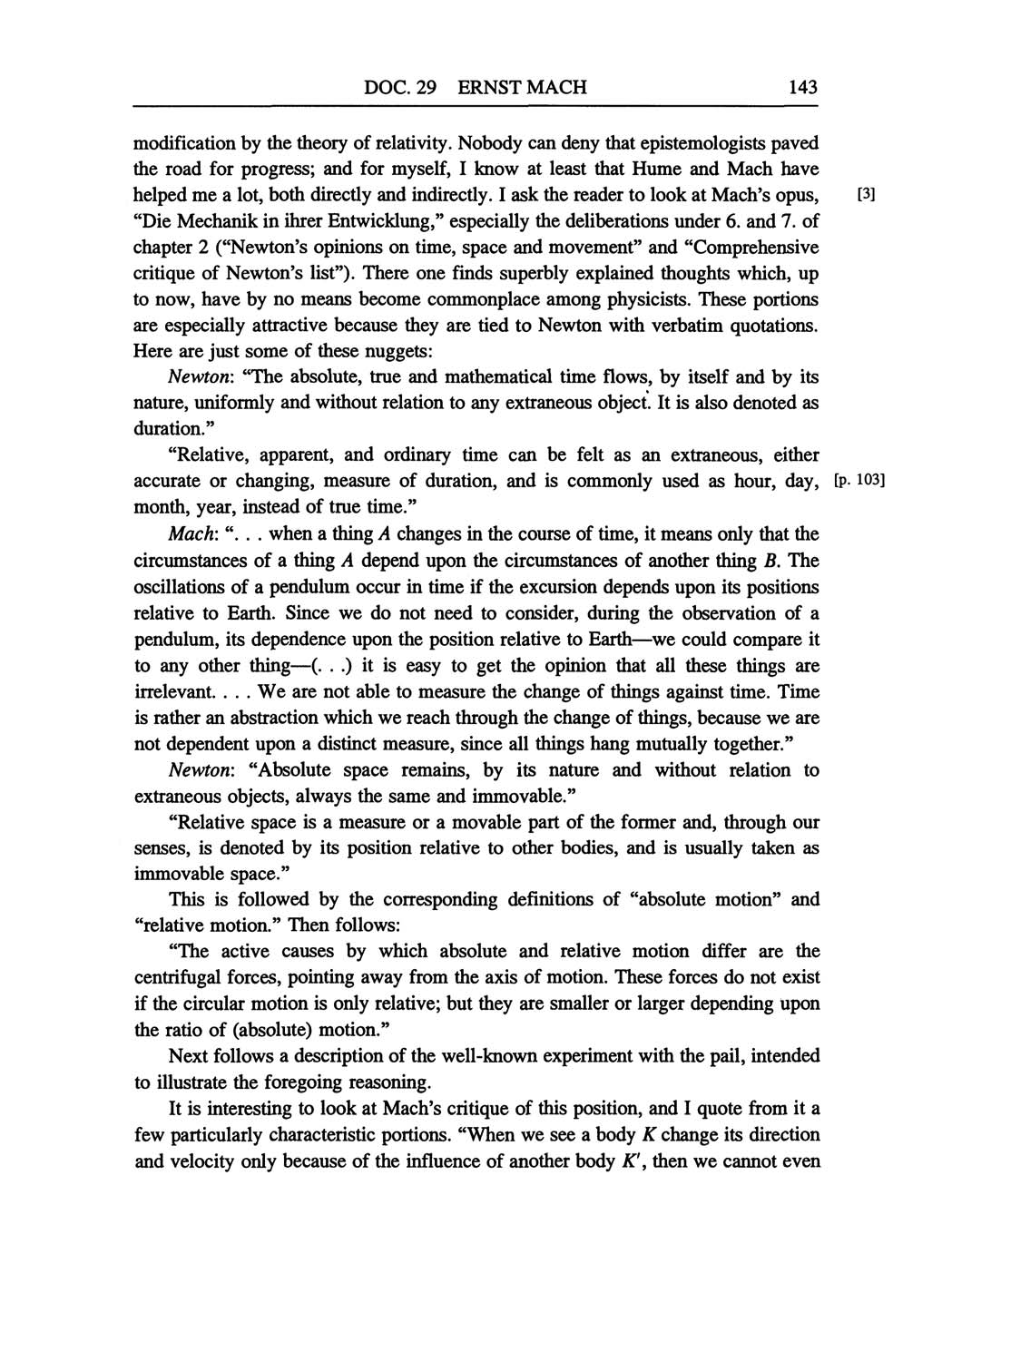 Volume 6: The Berlin Years: Writings, 1914-1917 (English translation supplement) page 143